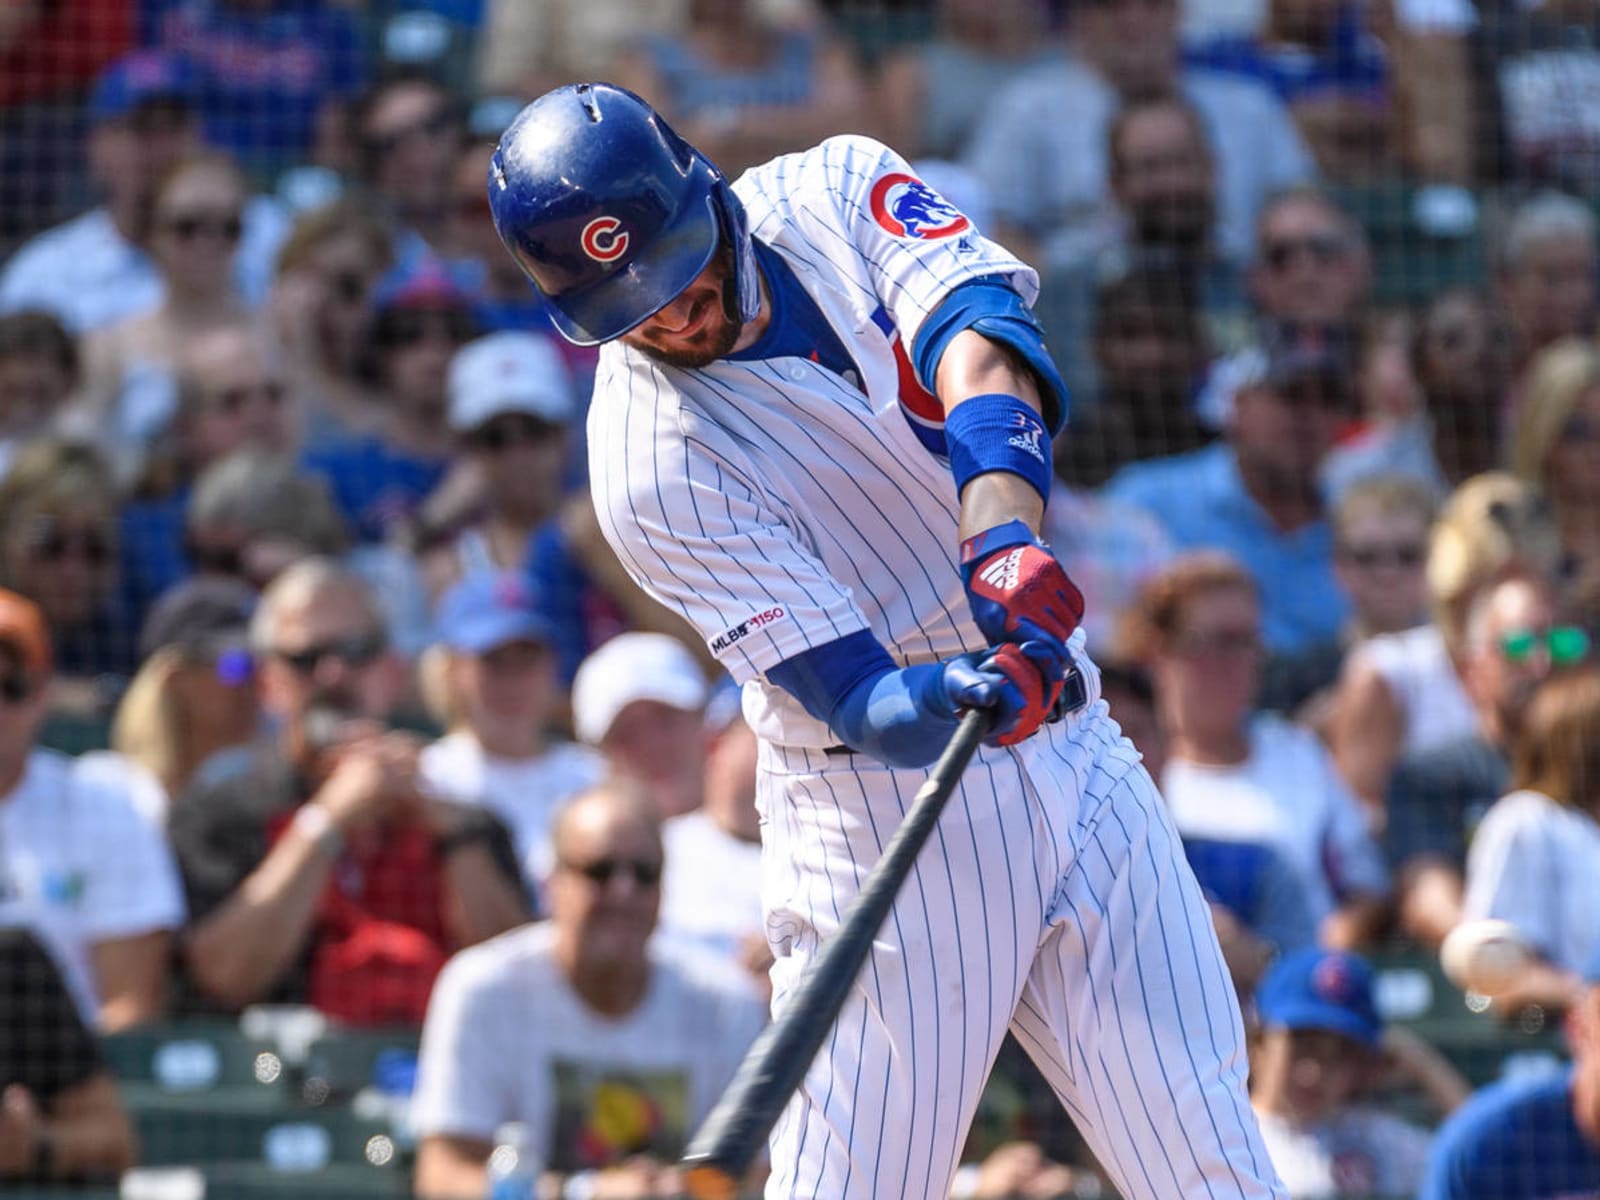 Kris Bryant would love to see MLB club move to Las Vegas